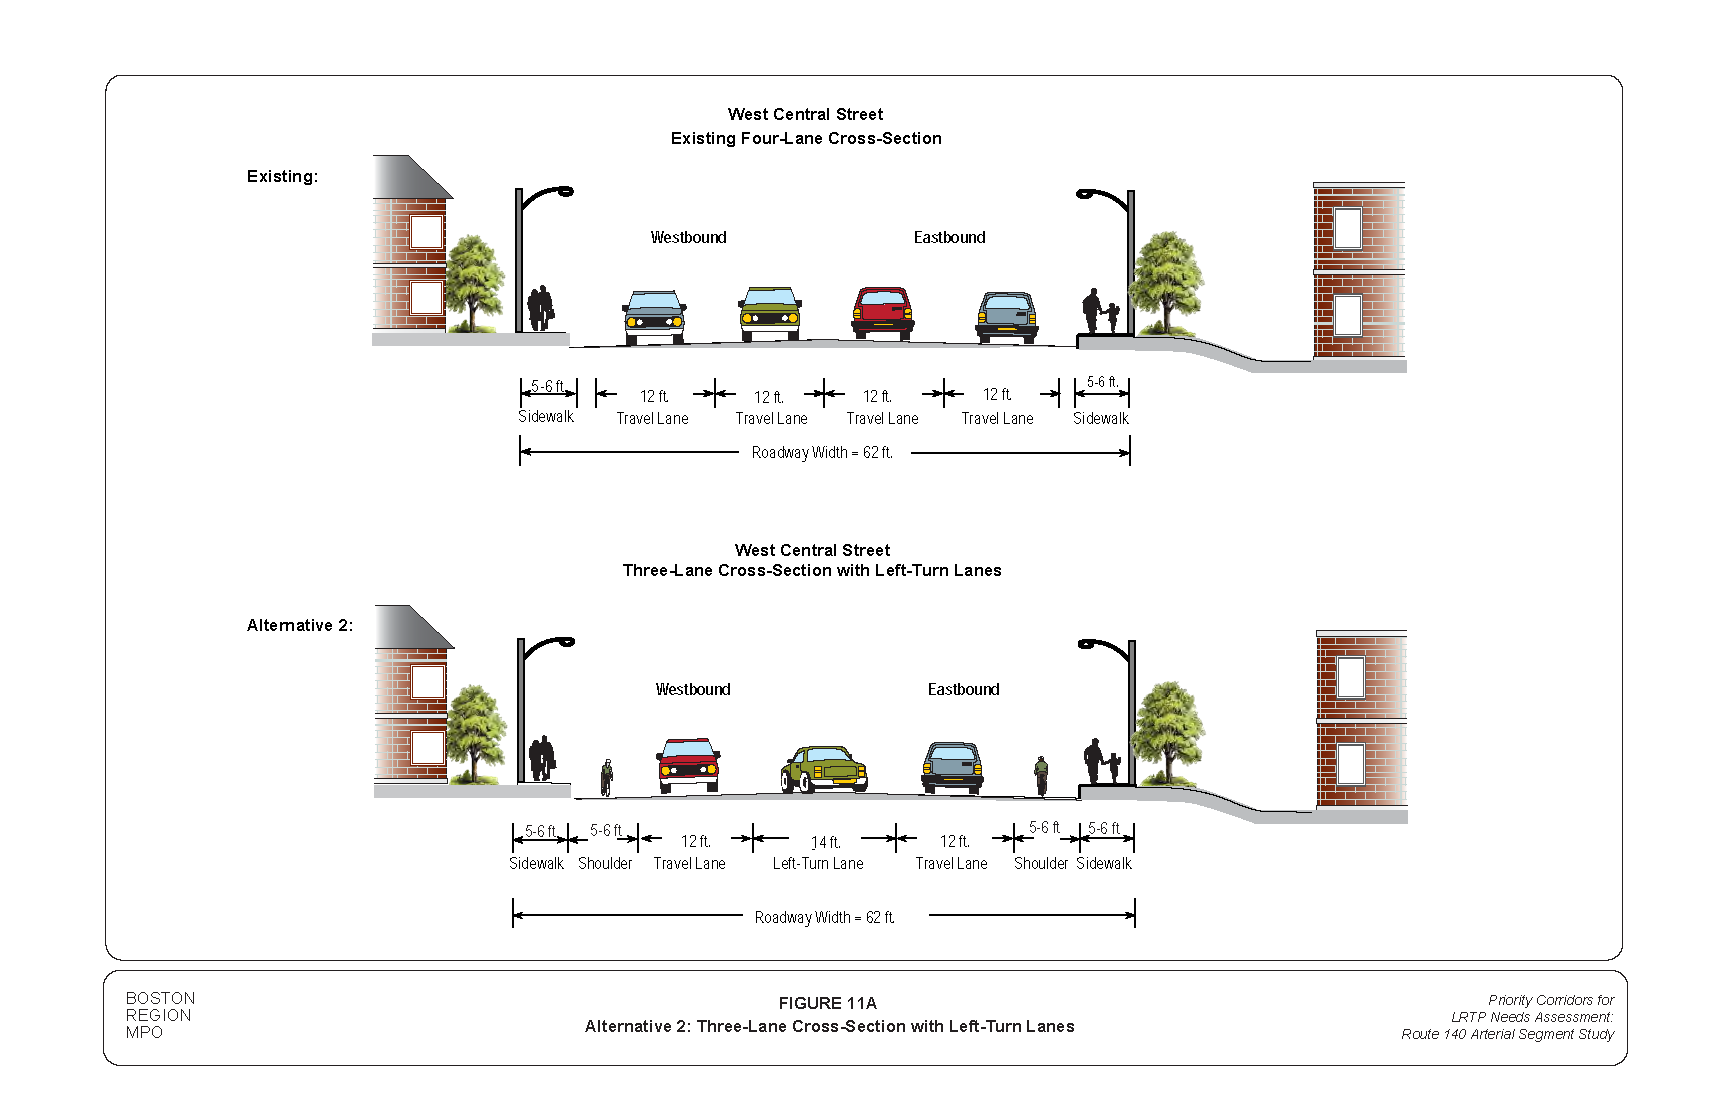 FIGURE 11A: Alternative 2: Three-Lane Cross-Section with Left-Turn Lanes. Computer-drawn roadway cross-section that portrays MPO staff “Improvement Alternative 2,” which recommends reconfiguring West Central Street into a three-lane cross-section with left-turn lanes.